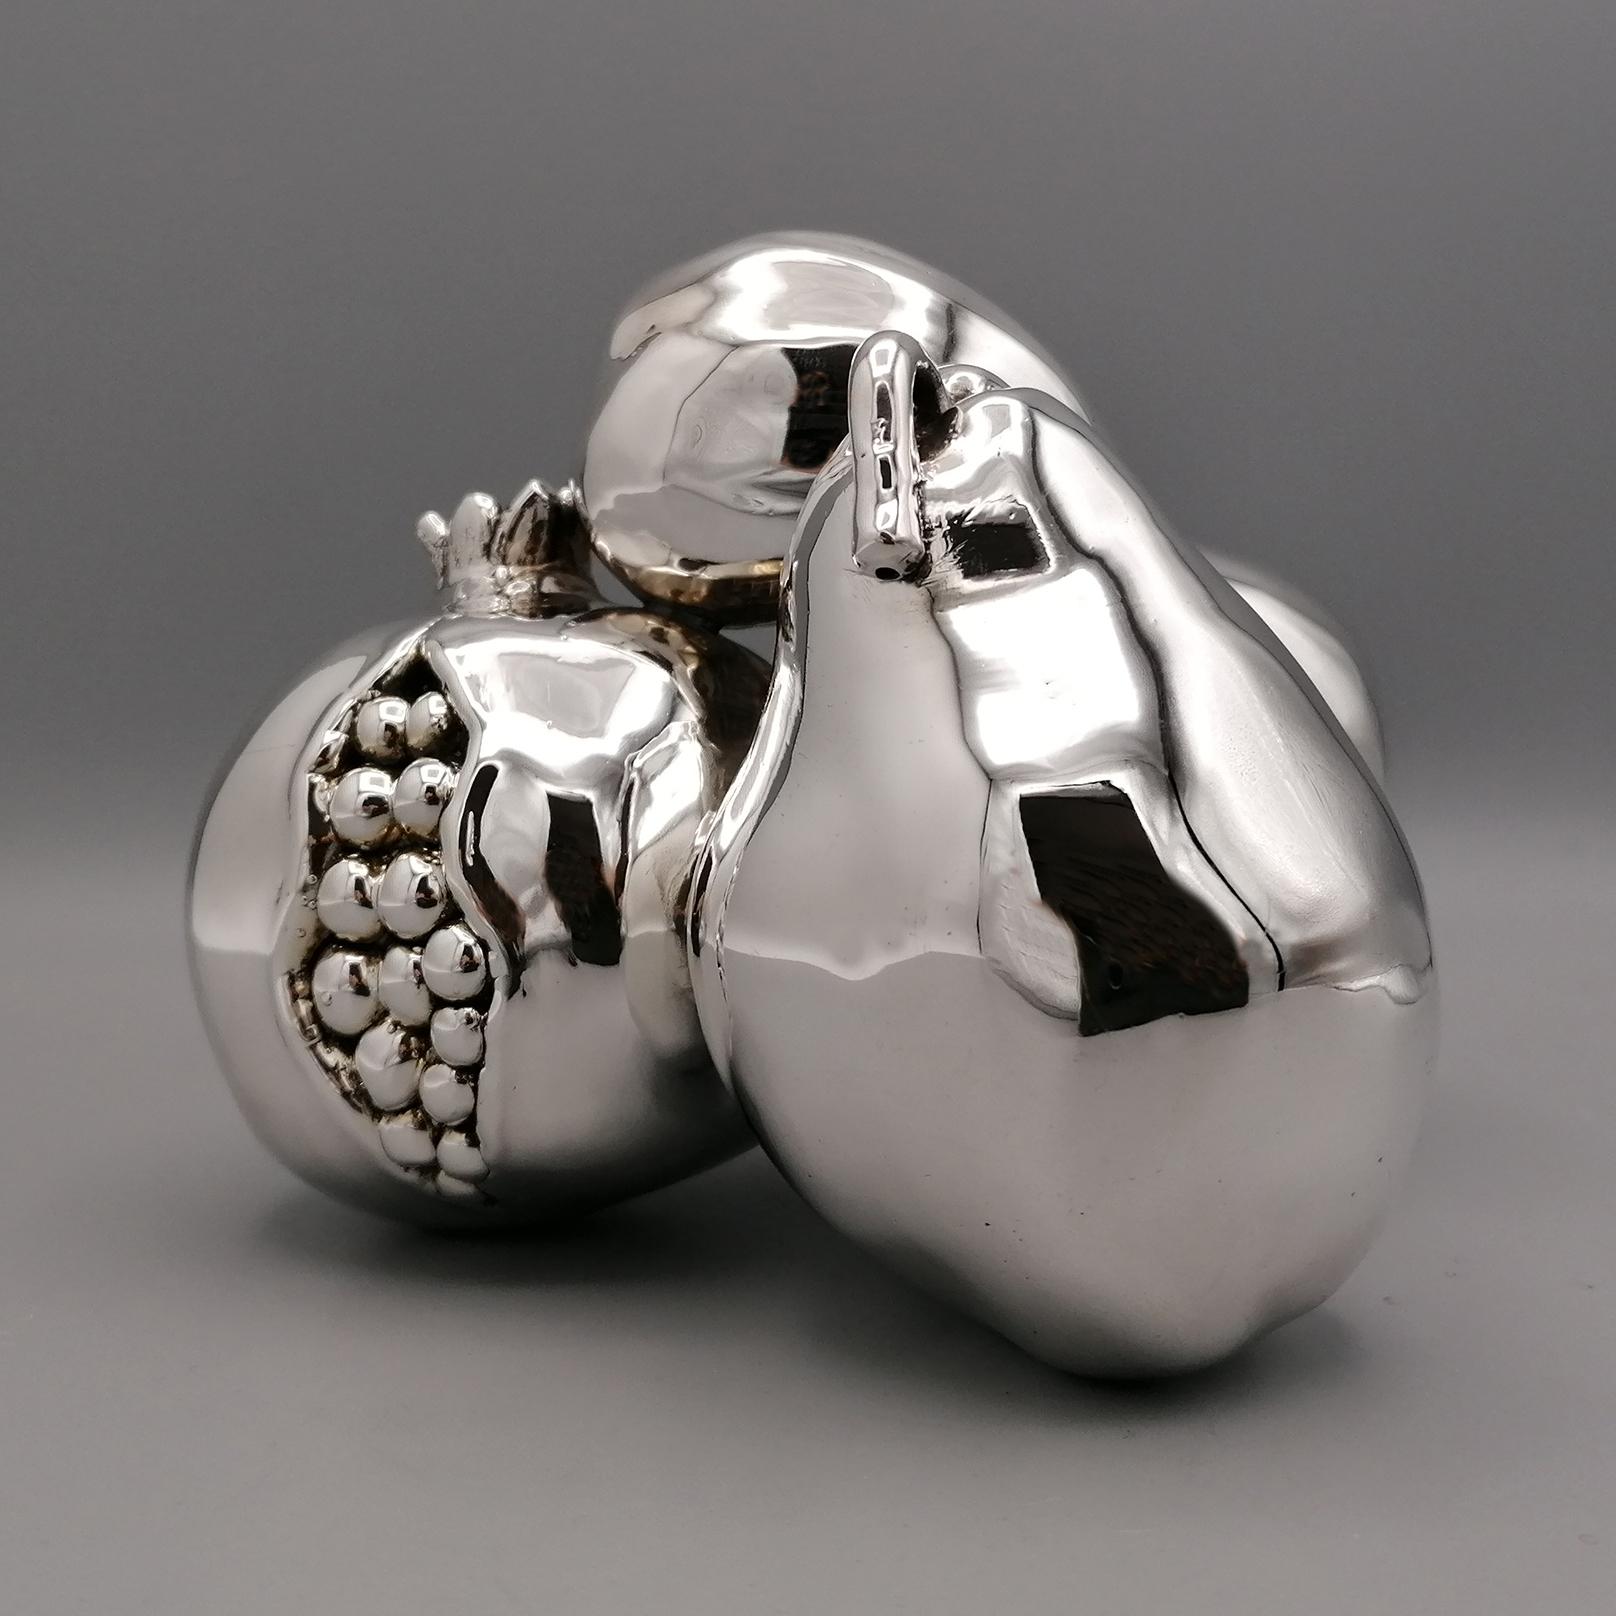 Other Fruit set - pomegranate pear fig apple - in 999 silver